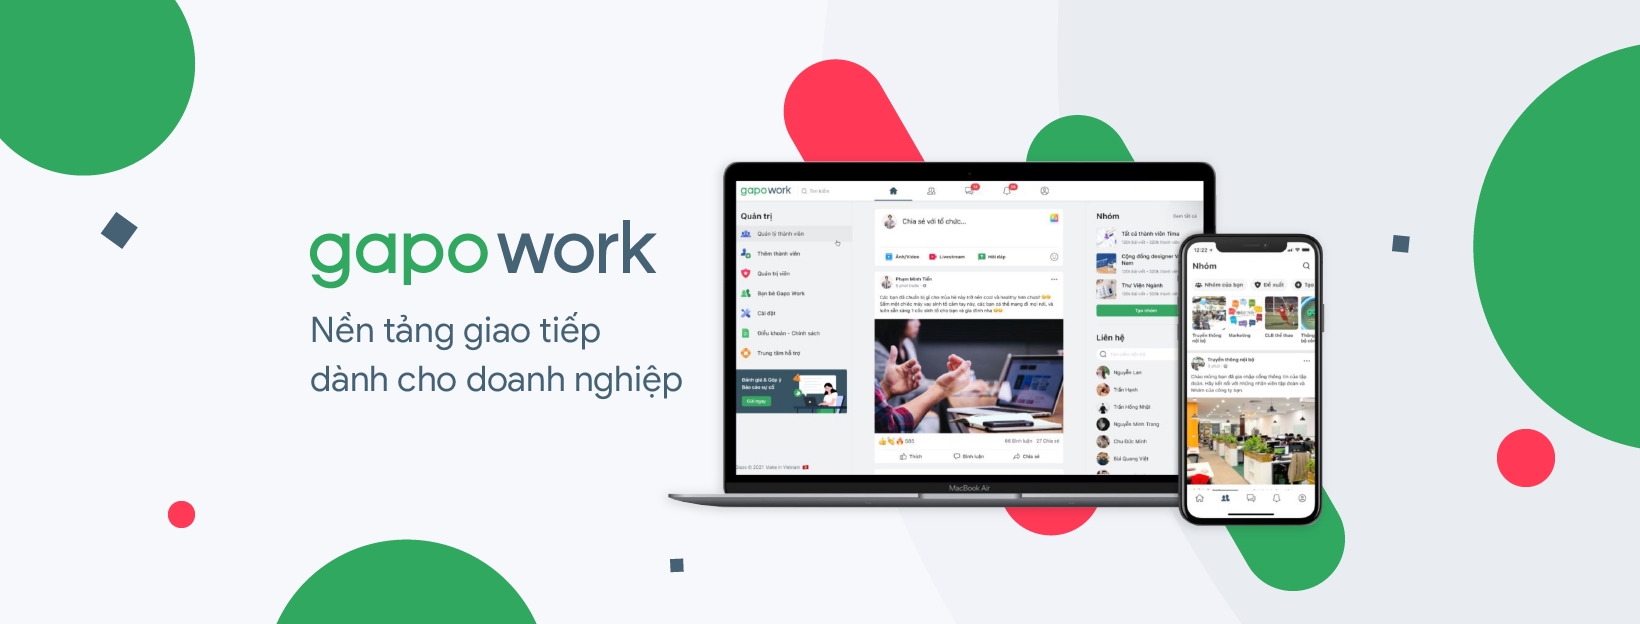 Nền tảng giao tiếp GapoWork